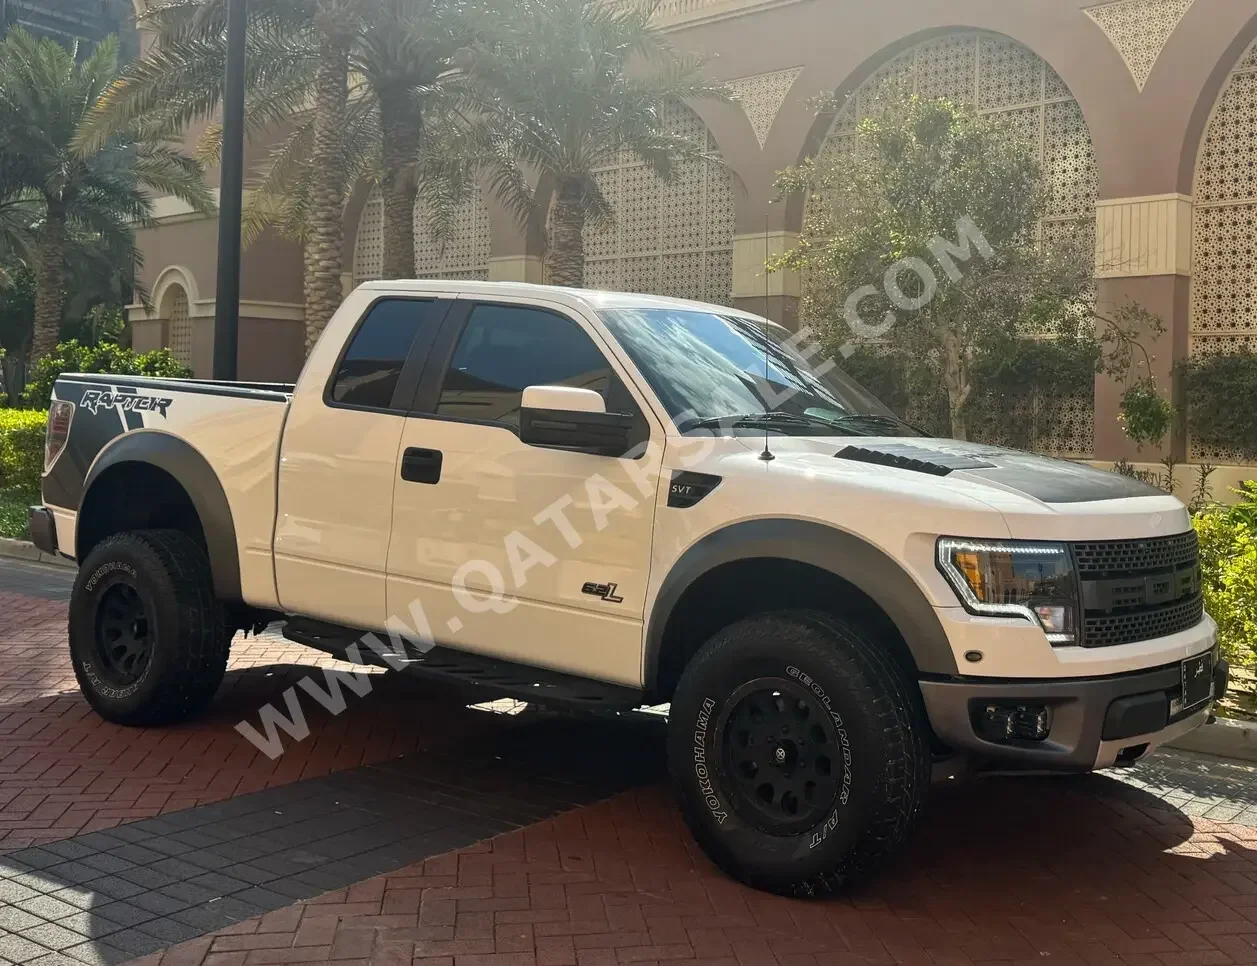 Ford  Raptor  SVT  2013  Automatic  295,000 Km  8 Cylinder  Four Wheel Drive (4WD)  Pick Up  White and Black